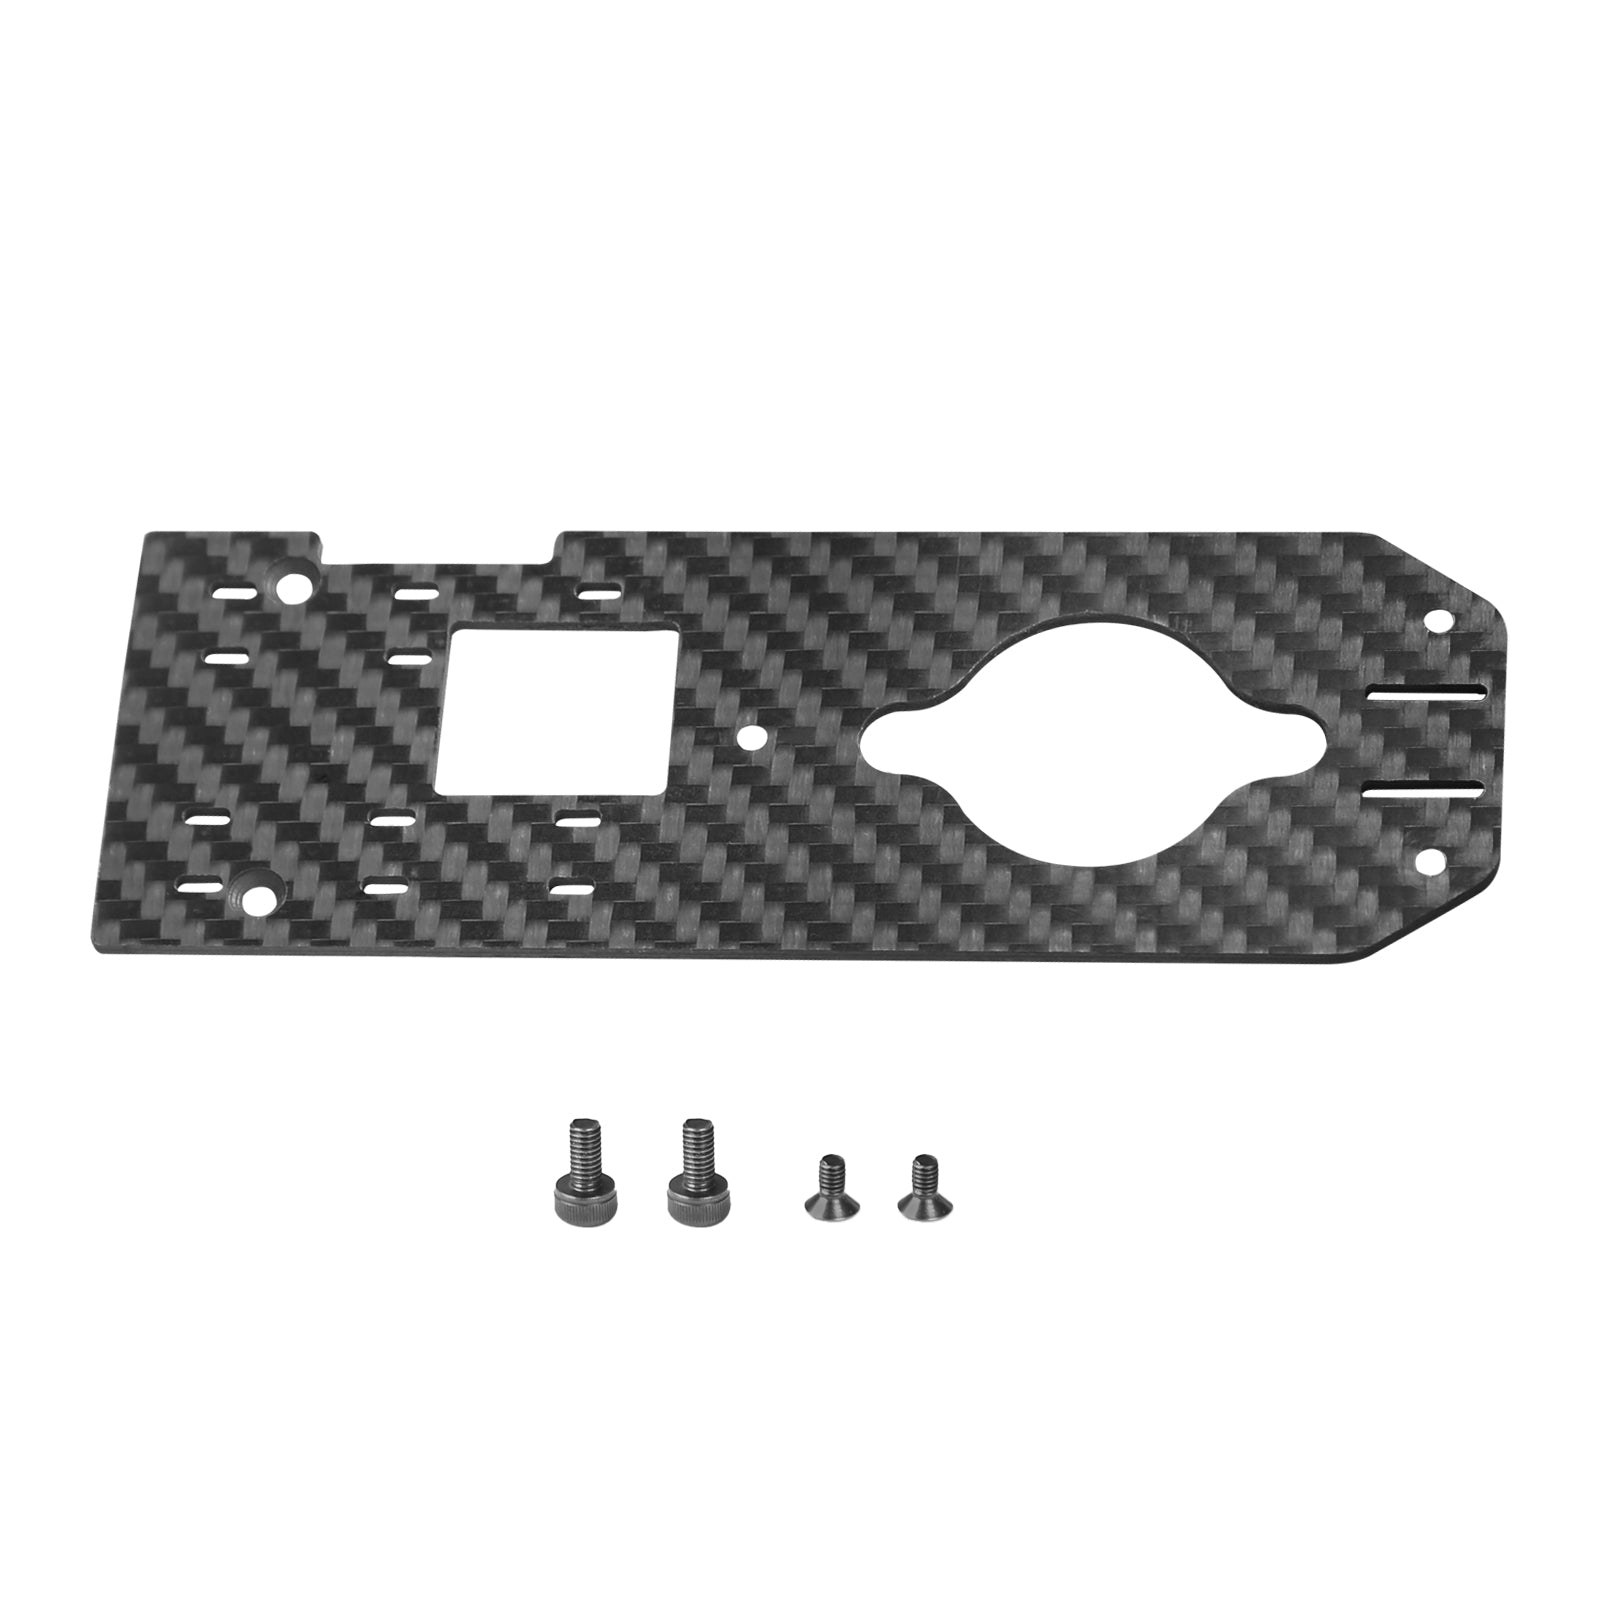 OMP HOBBY M7 Helicopter Parts Separator Carbon plate OSHM7059